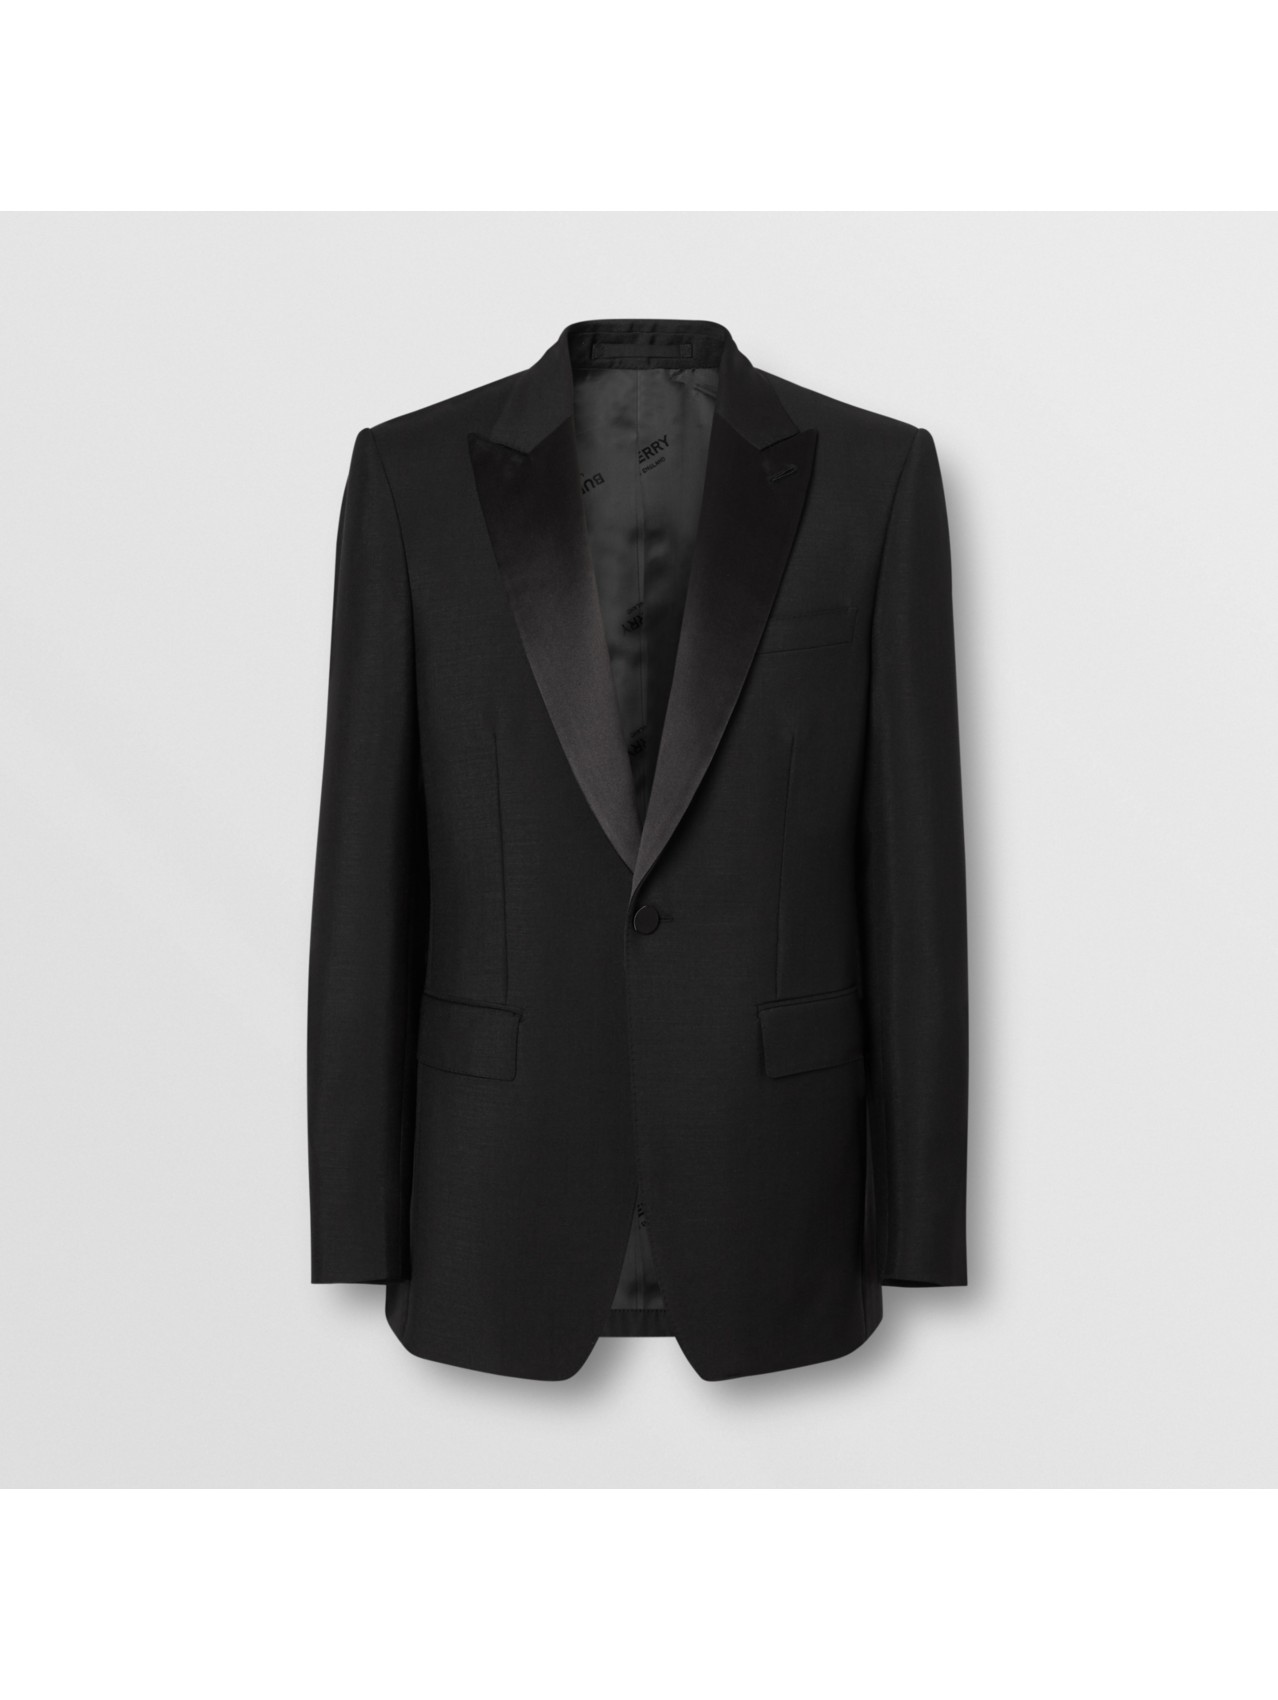 Fit Wool Suit Black - Men | Burberry United States